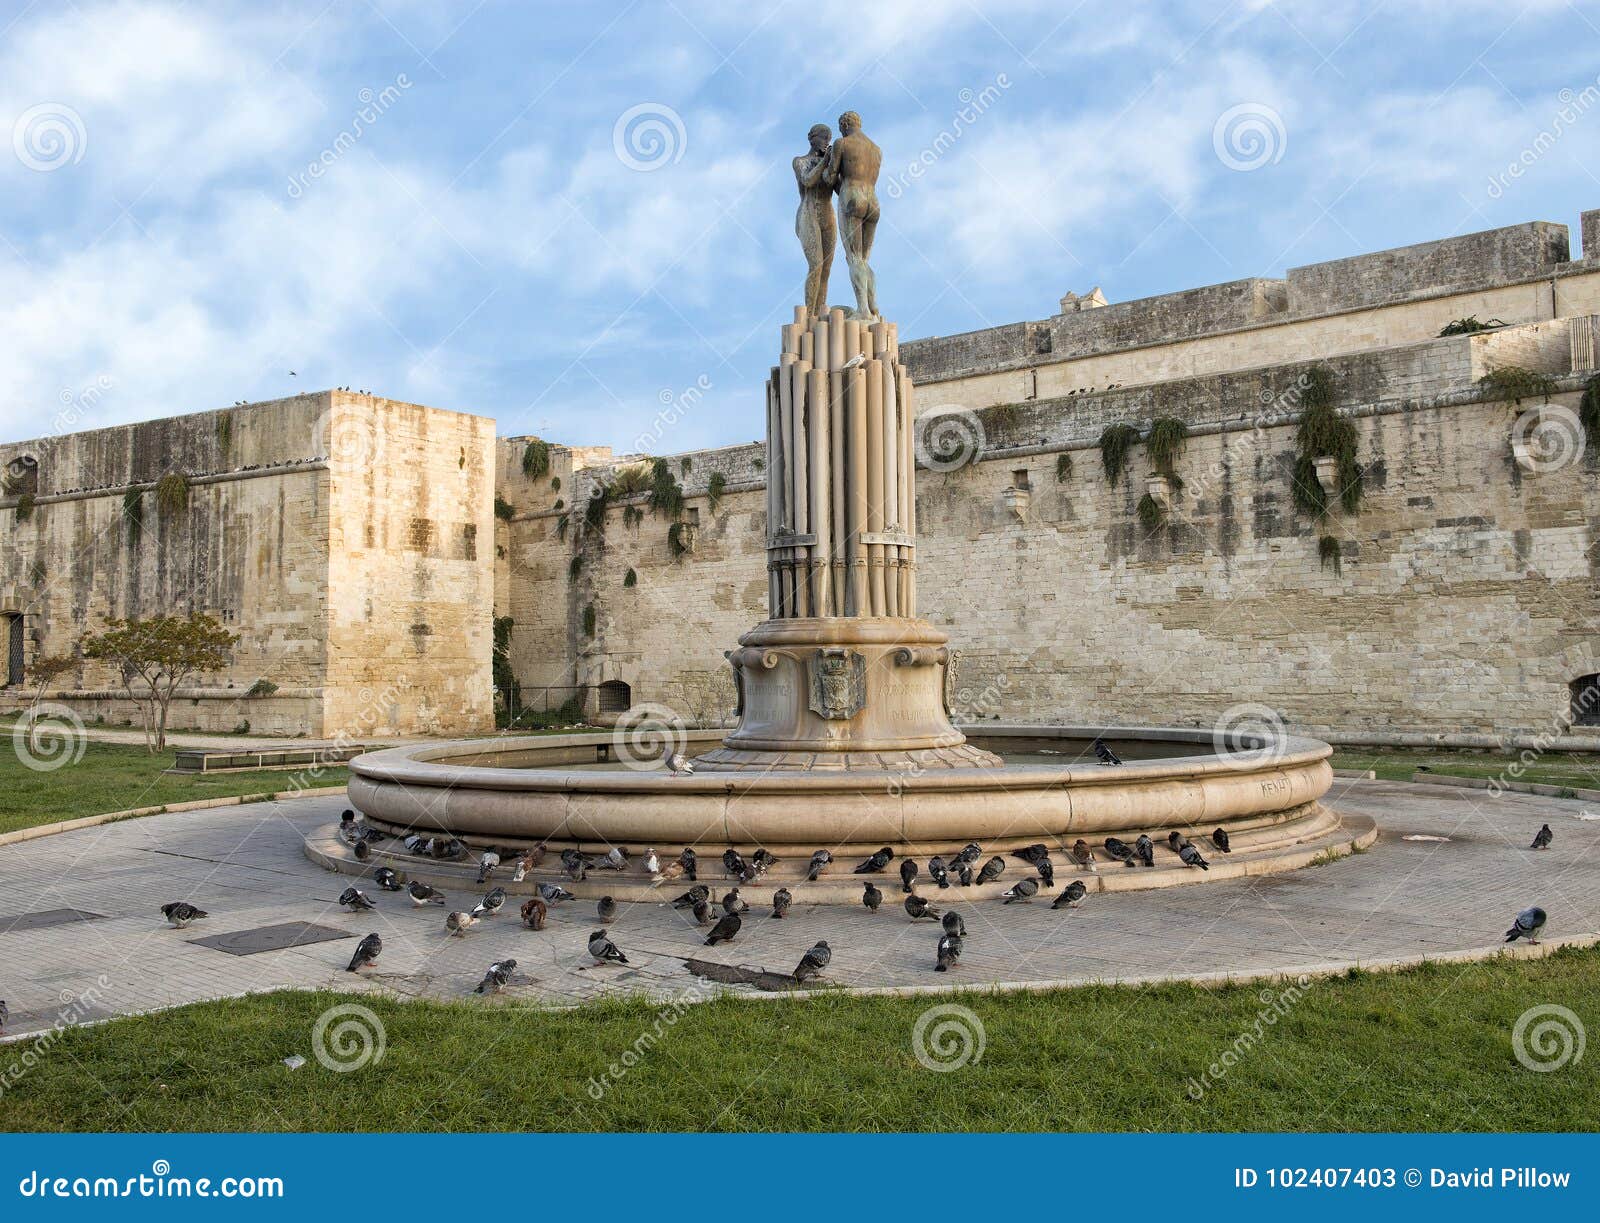 fountain of harmony in front of the castle of charles v, lecce